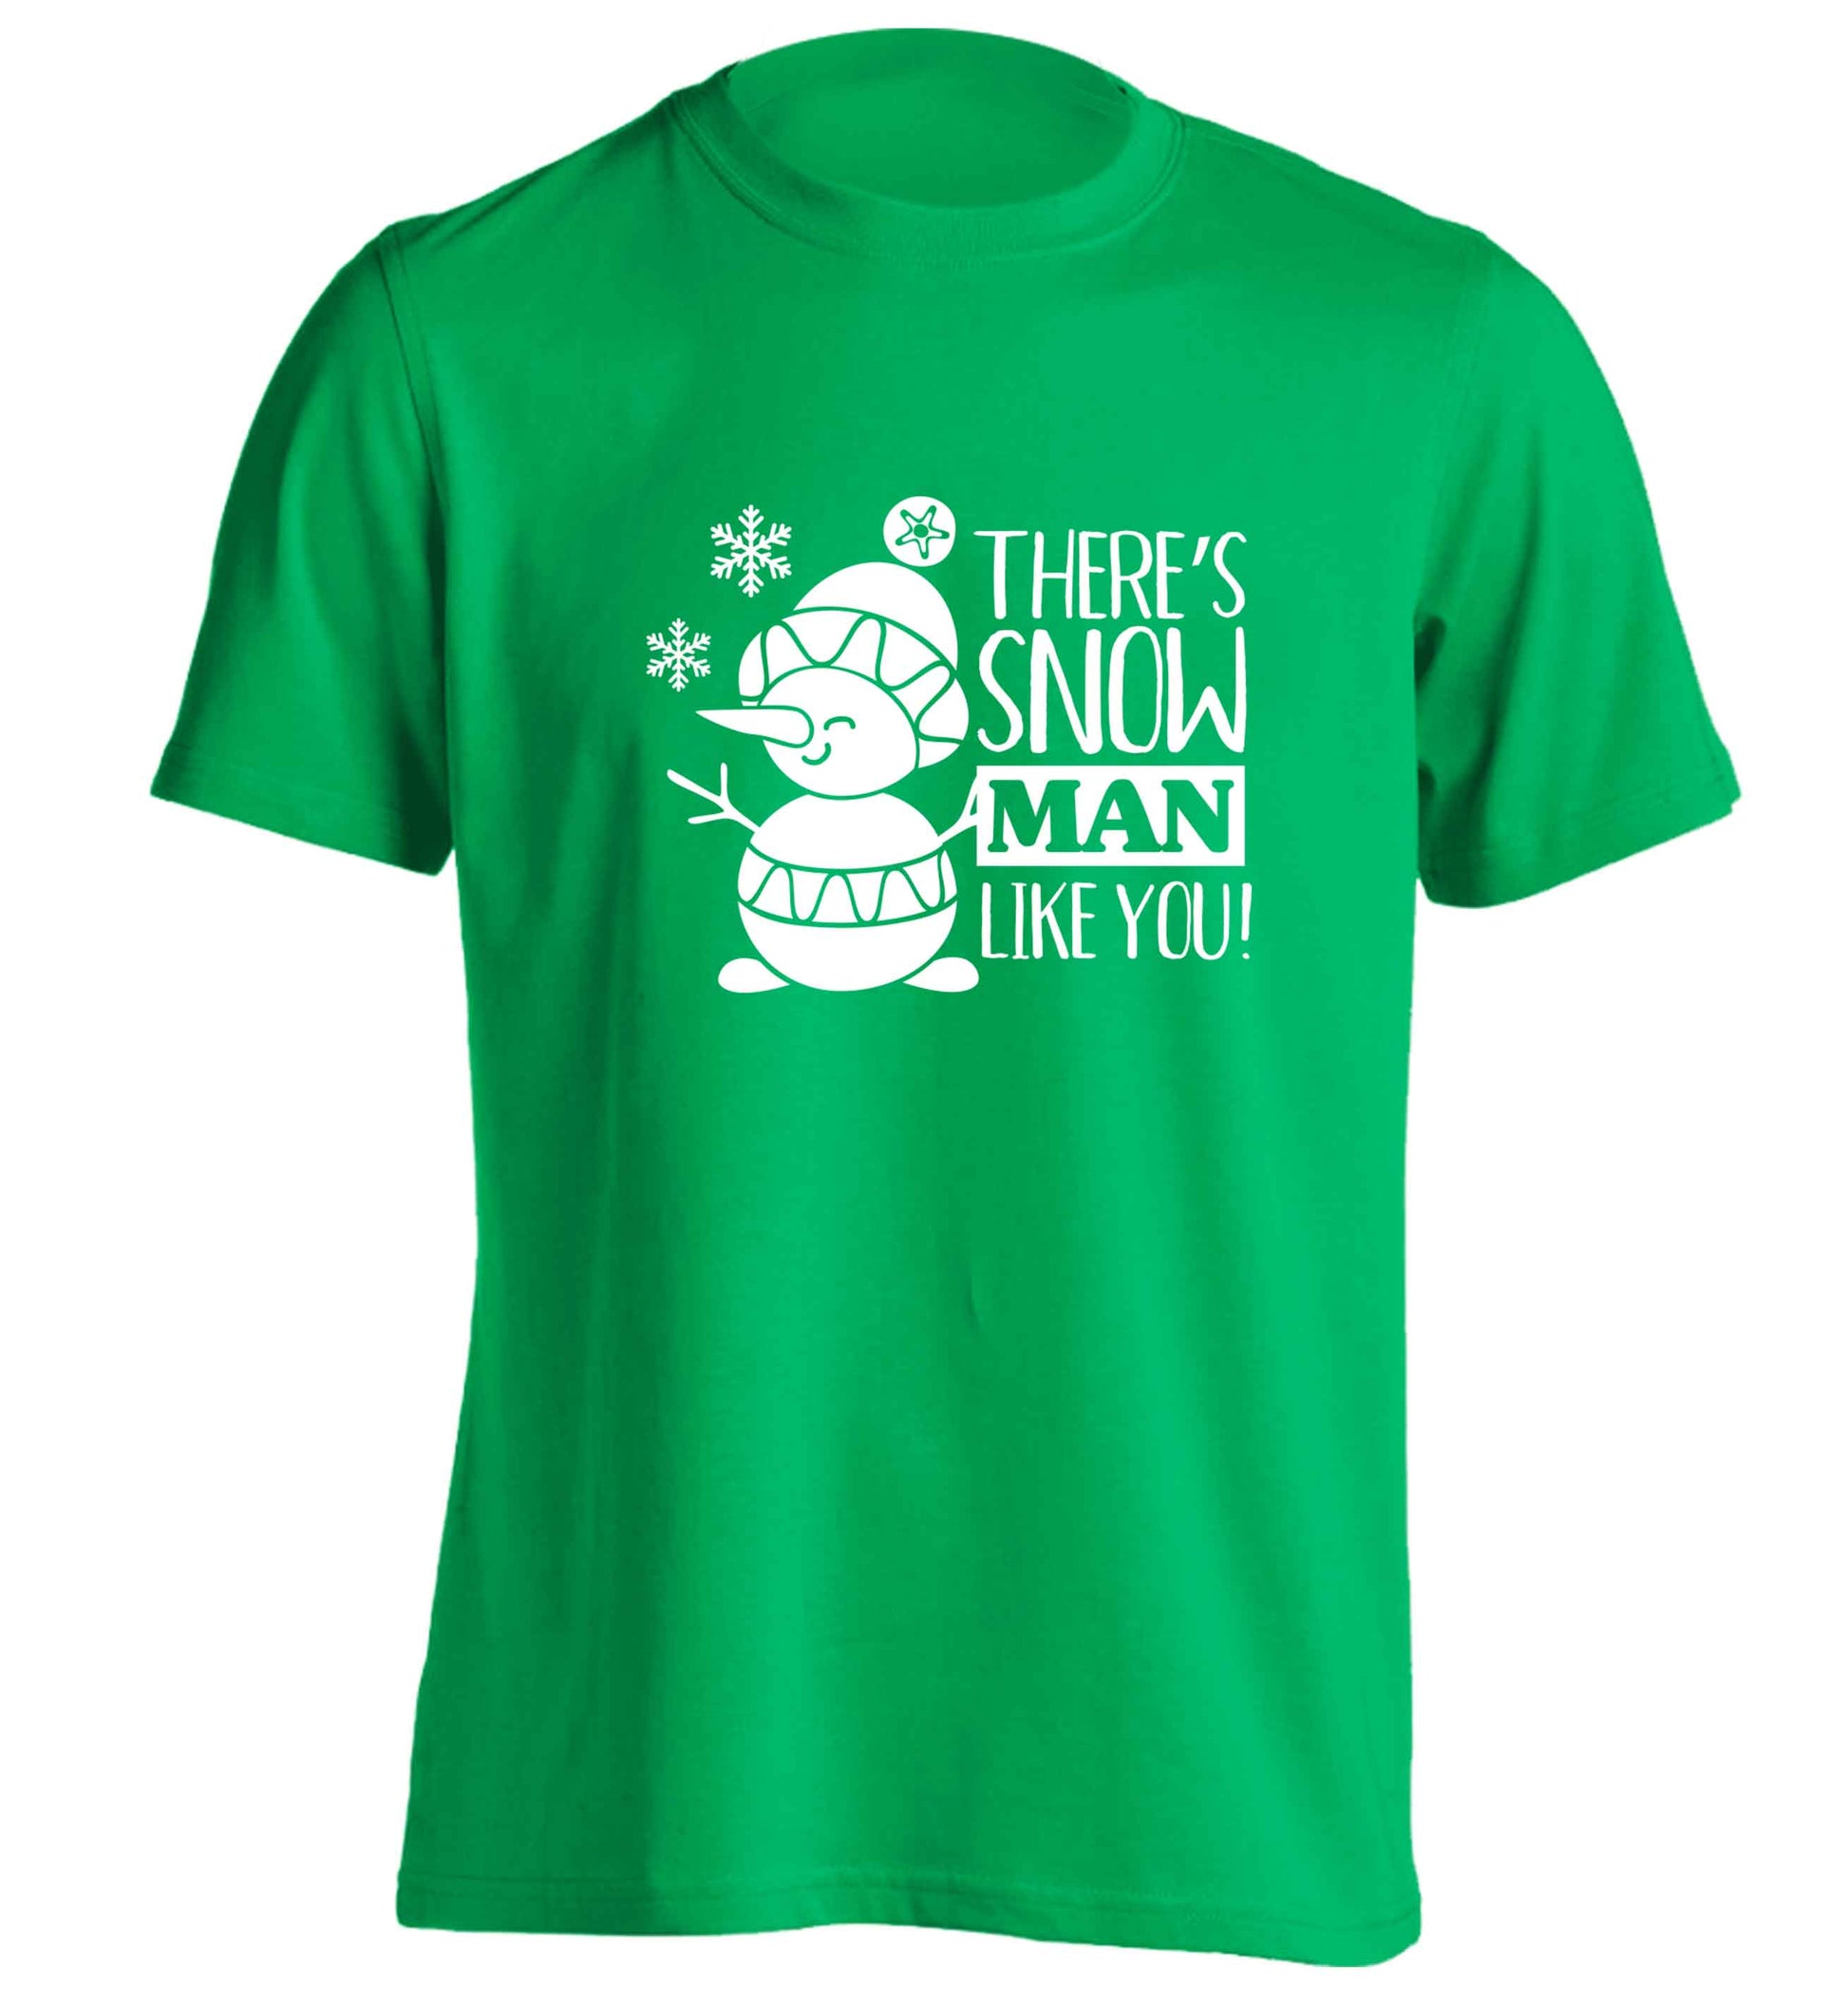 There's snow man like you adults unisex green Tshirt 2XL